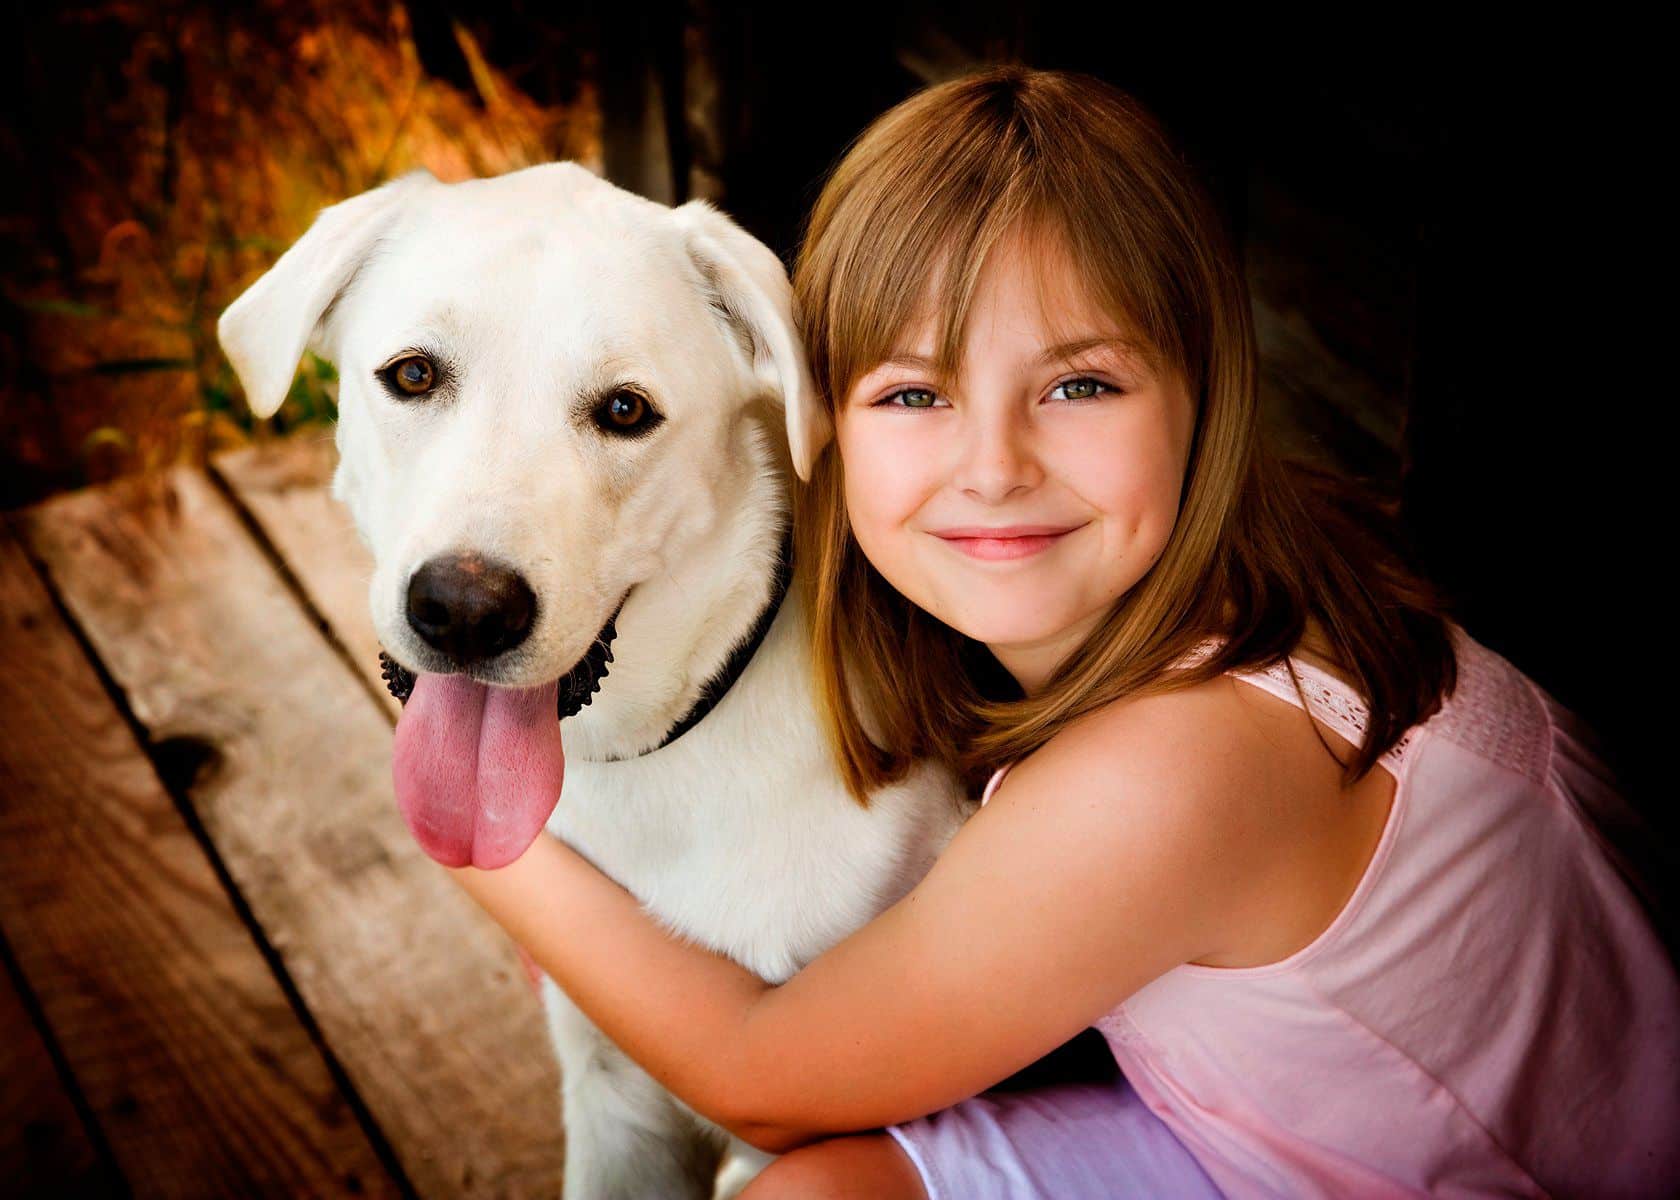 Little Girl and her Dog.